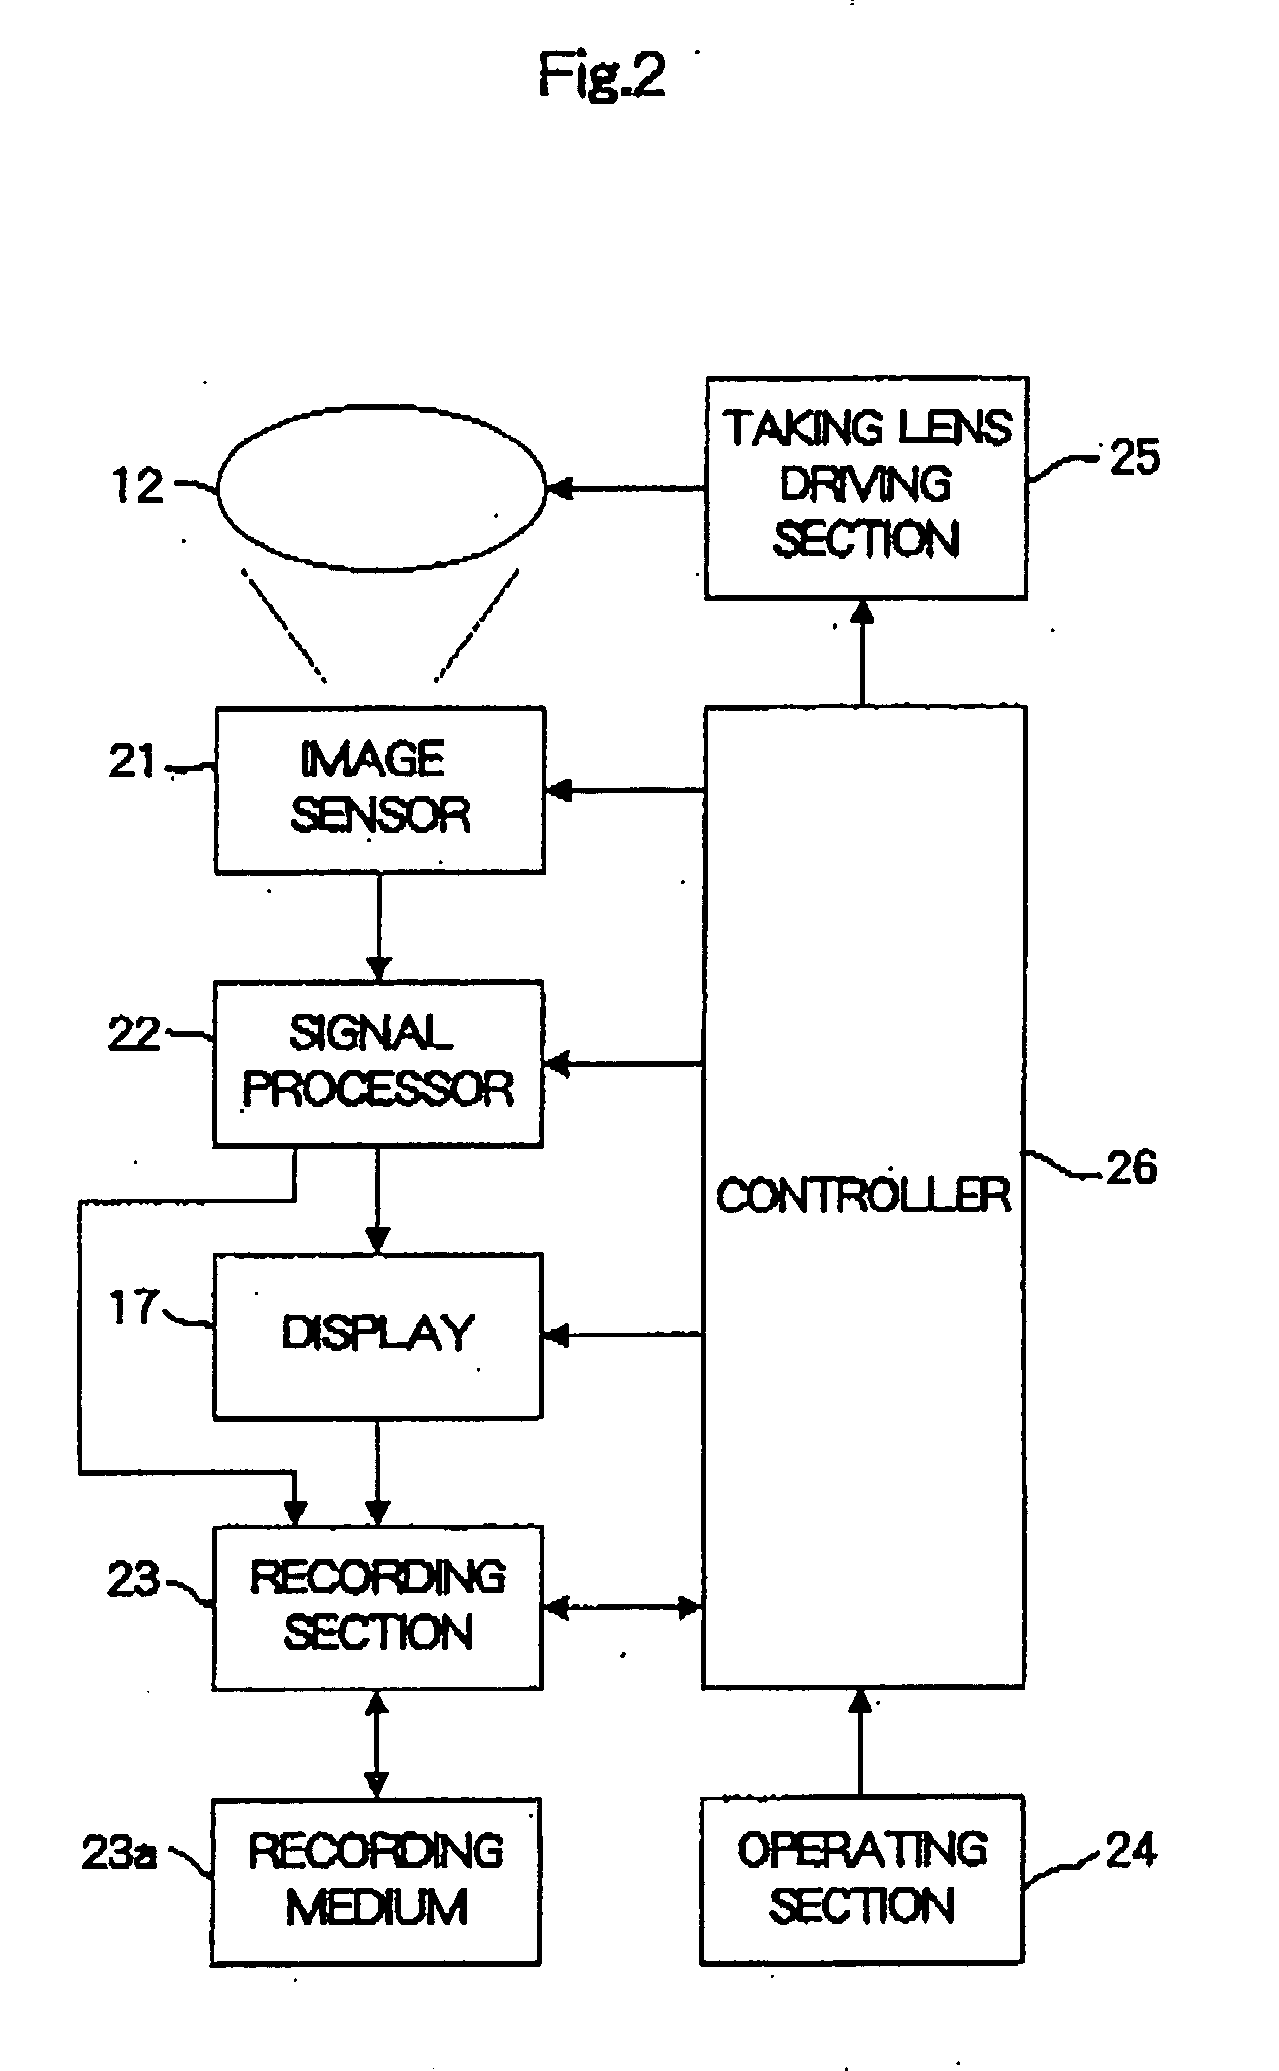 Taking lens system and image capturing apparatus